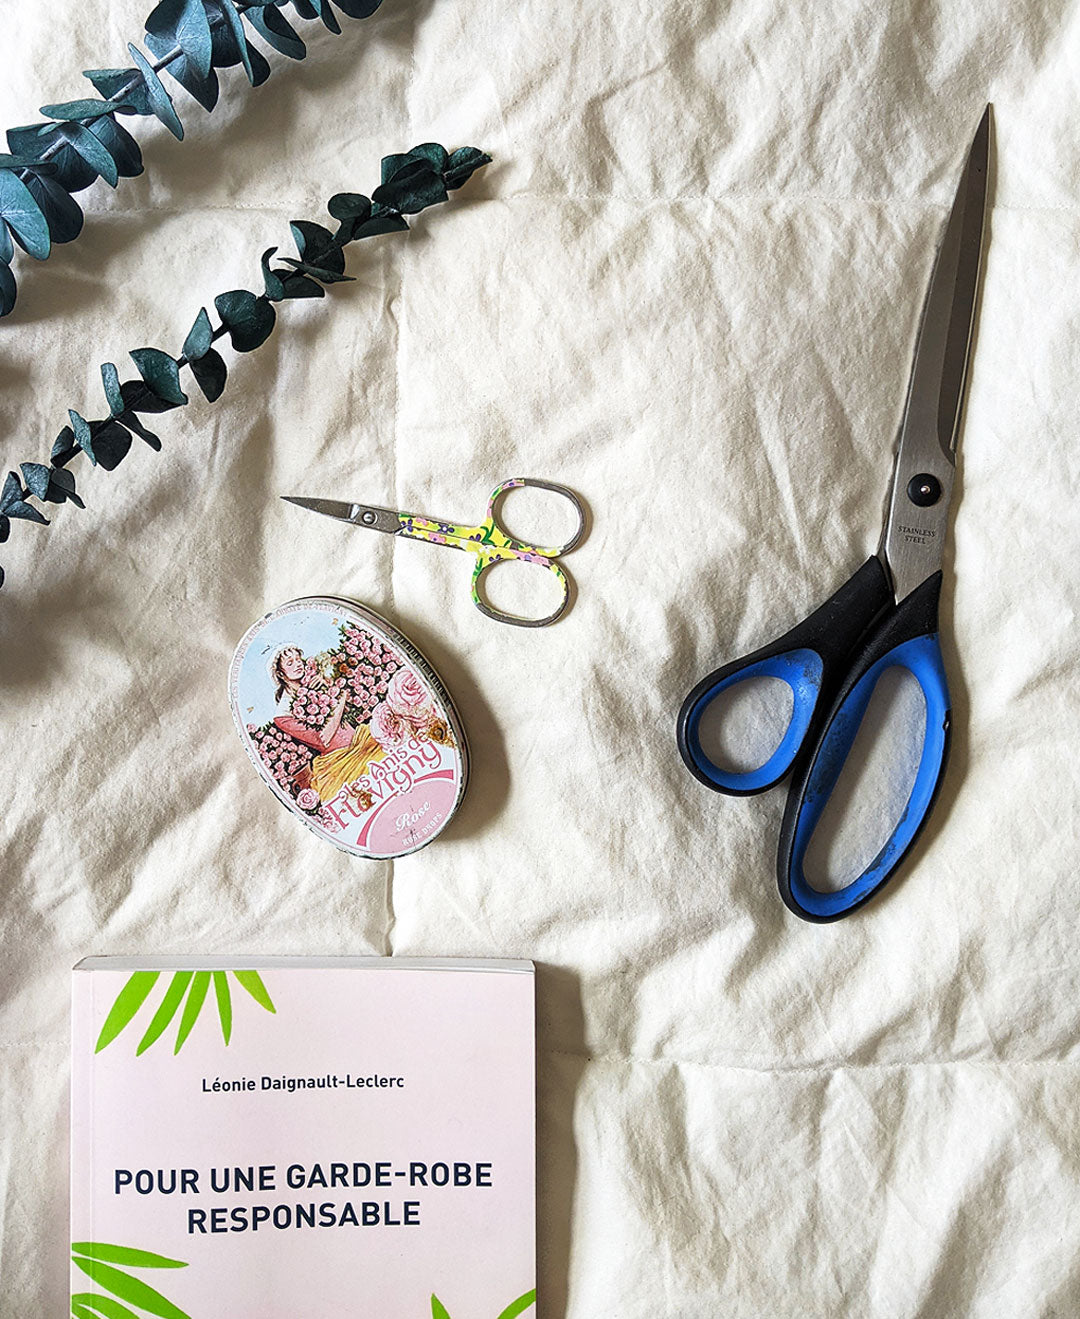 Sewing course for beginners: Mending by hand